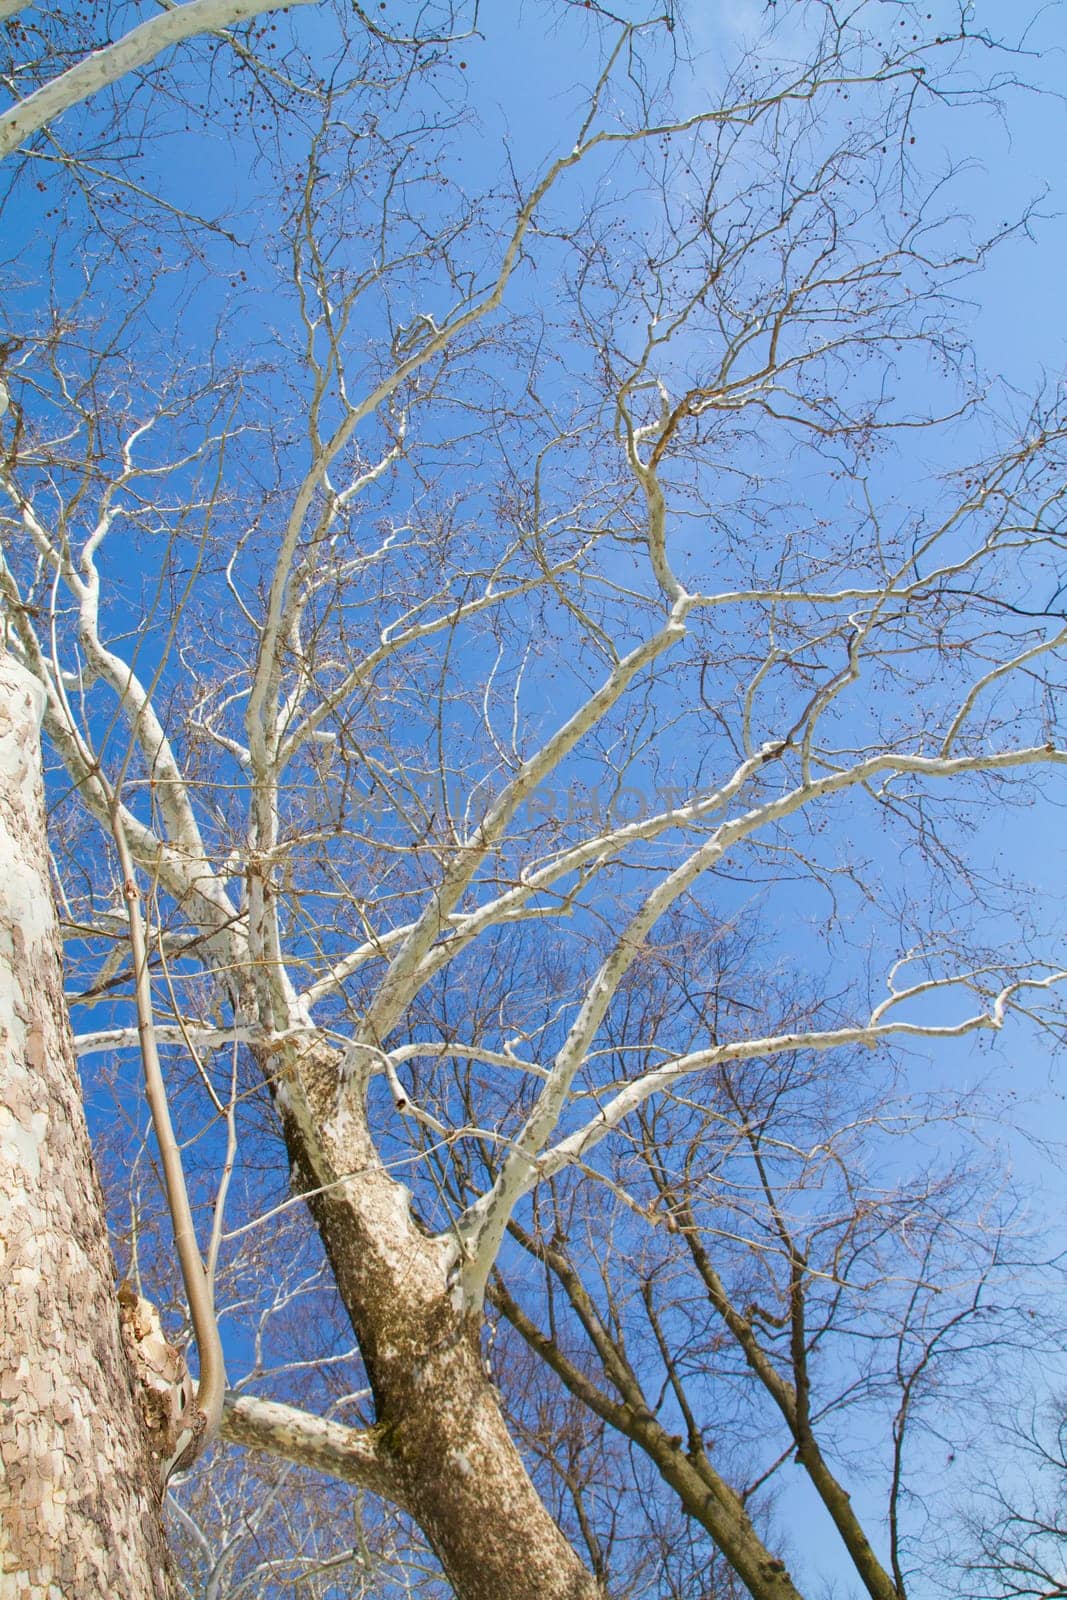 Winter's Complexity: Leafless Trees Reaching Skyward in Fort Wayne by njproductions